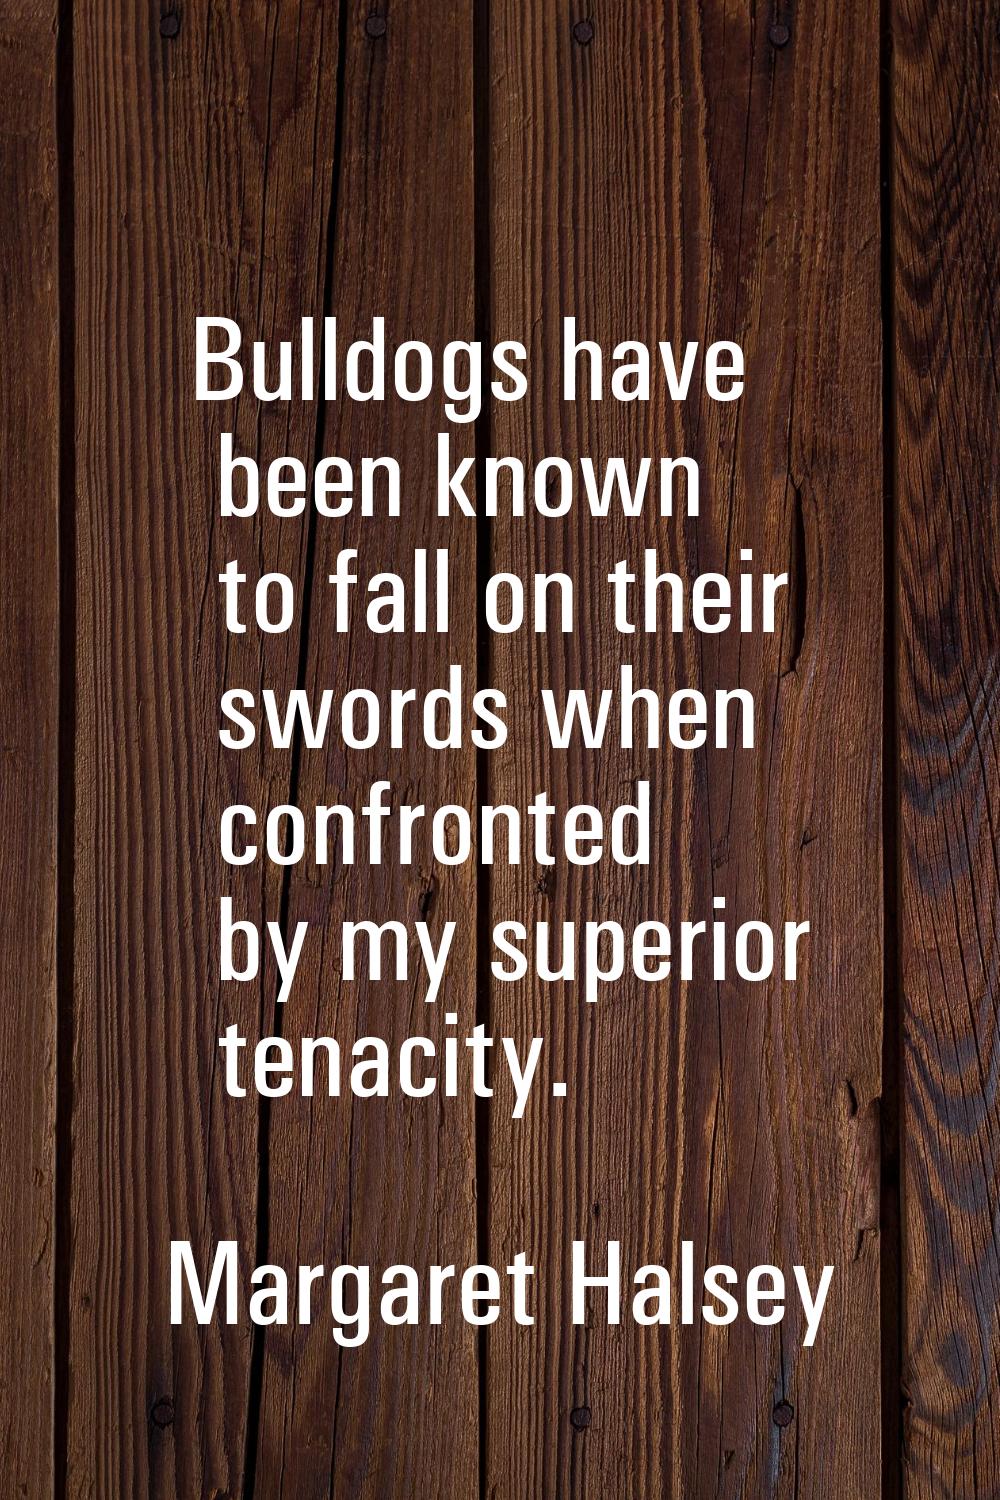 Bulldogs have been known to fall on their swords when confronted by my superior tenacity.